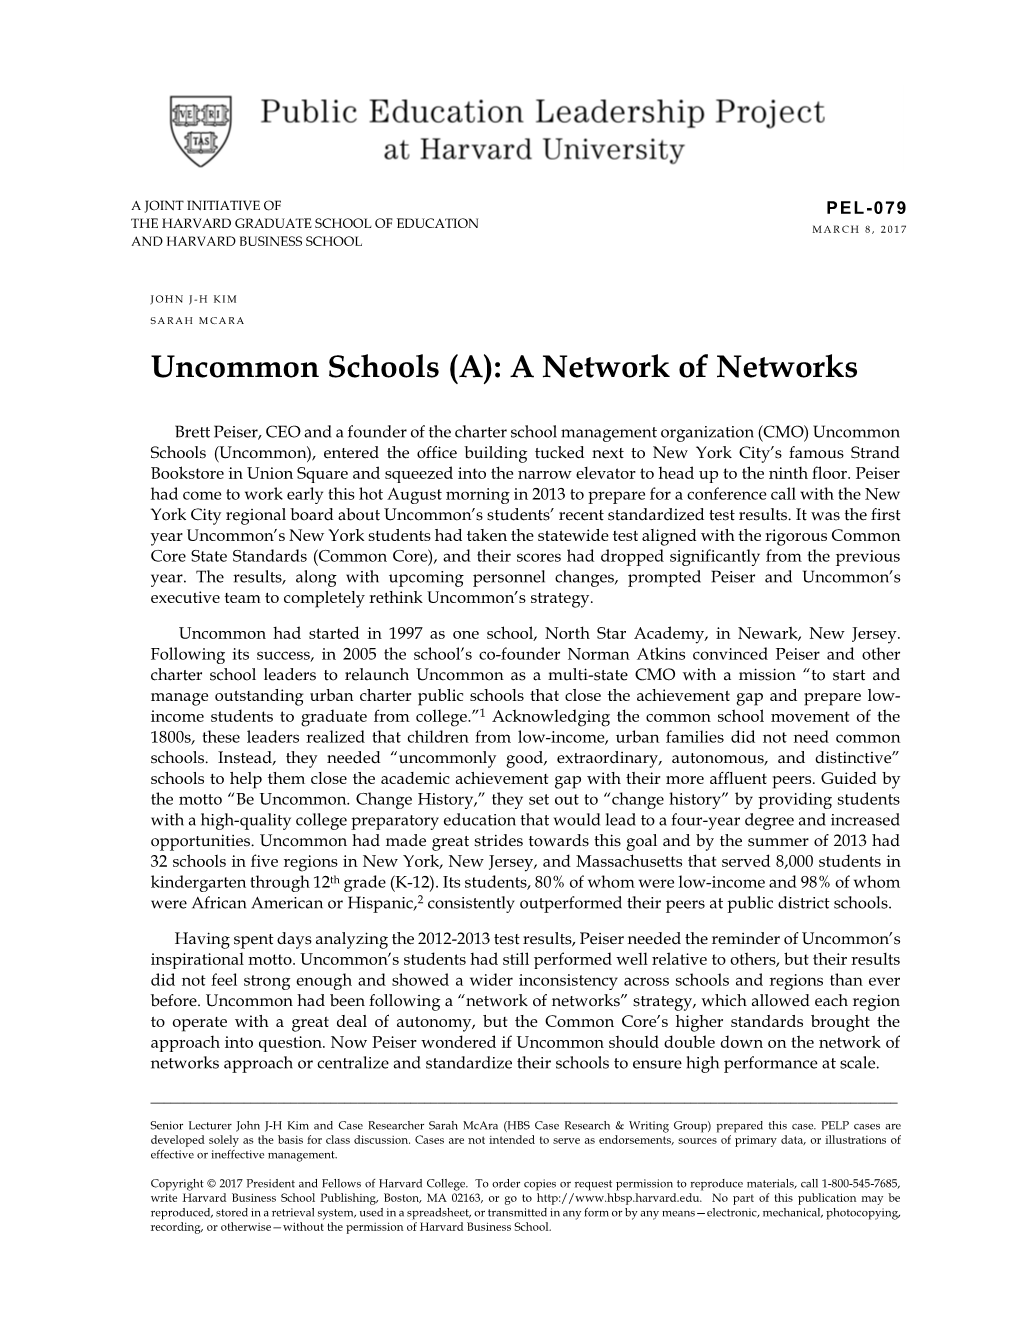 Uncommon Schools (A): a Network of Networks